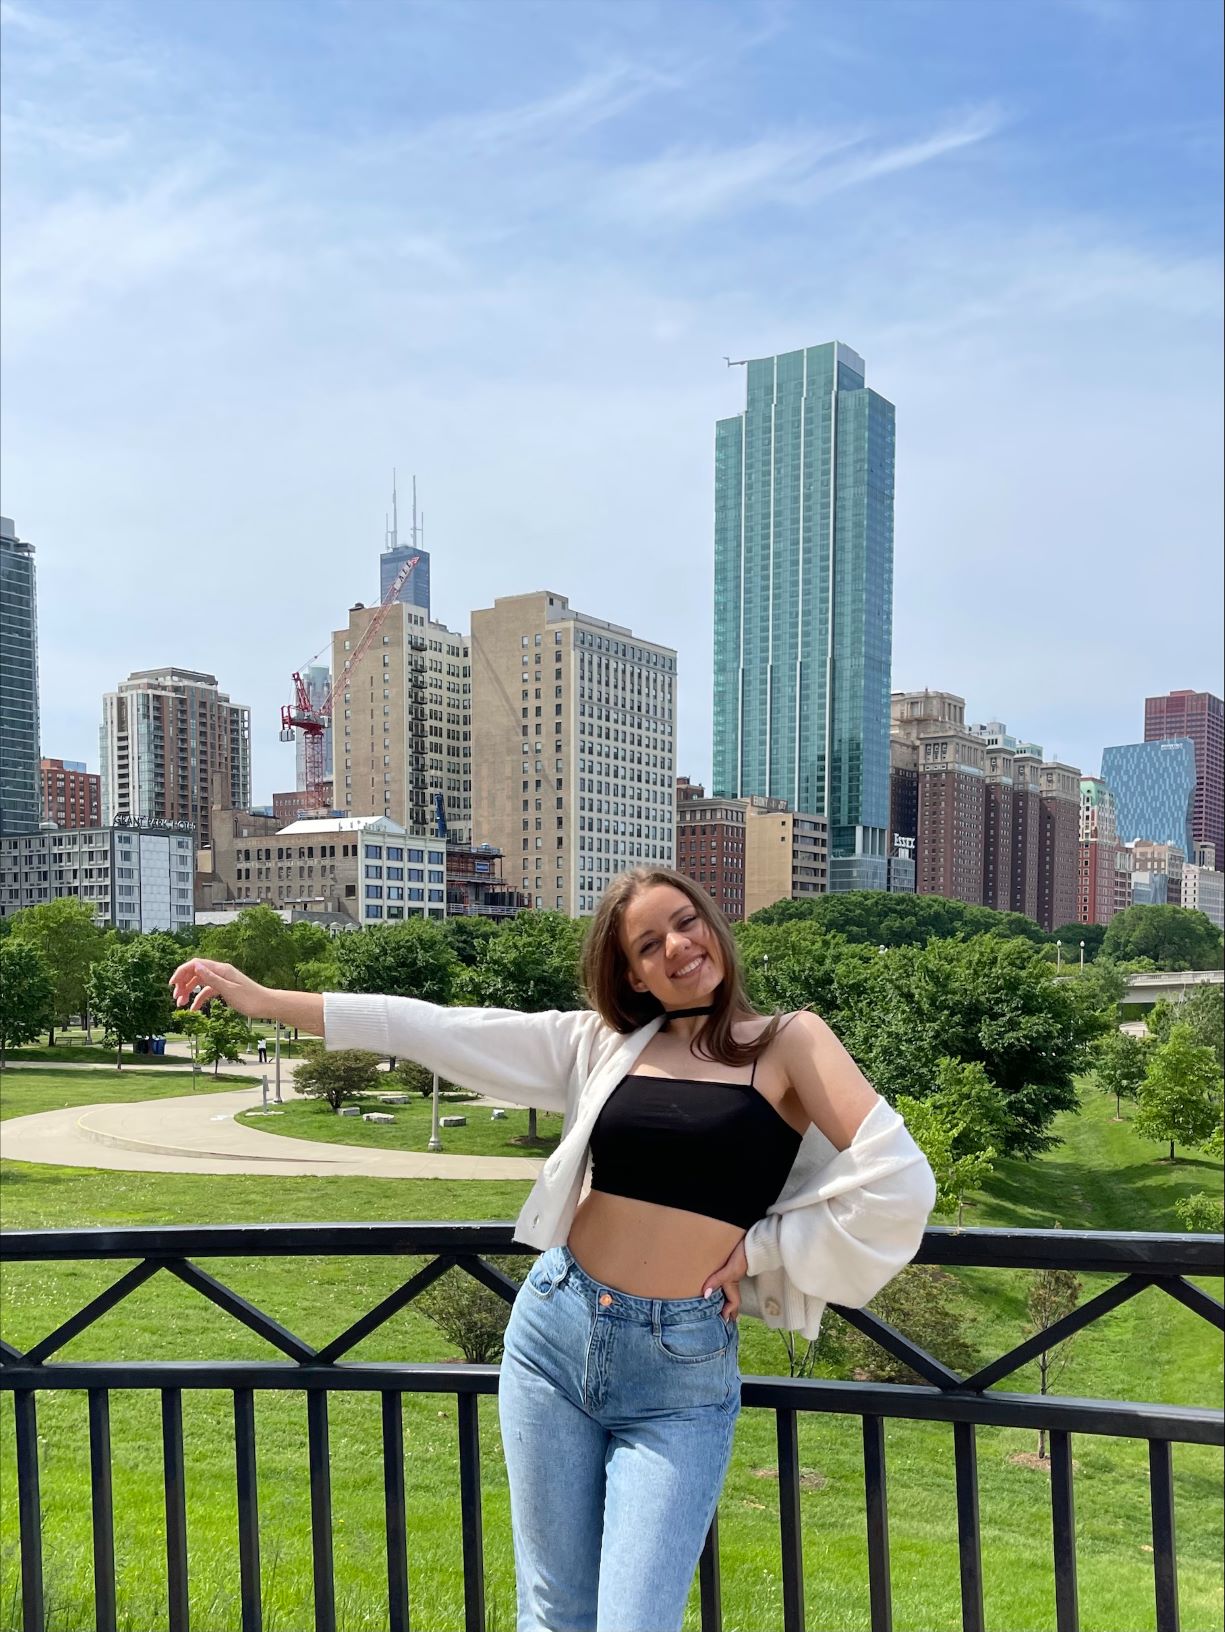 Photo of woman in front of Chicago skyscrapers posing.